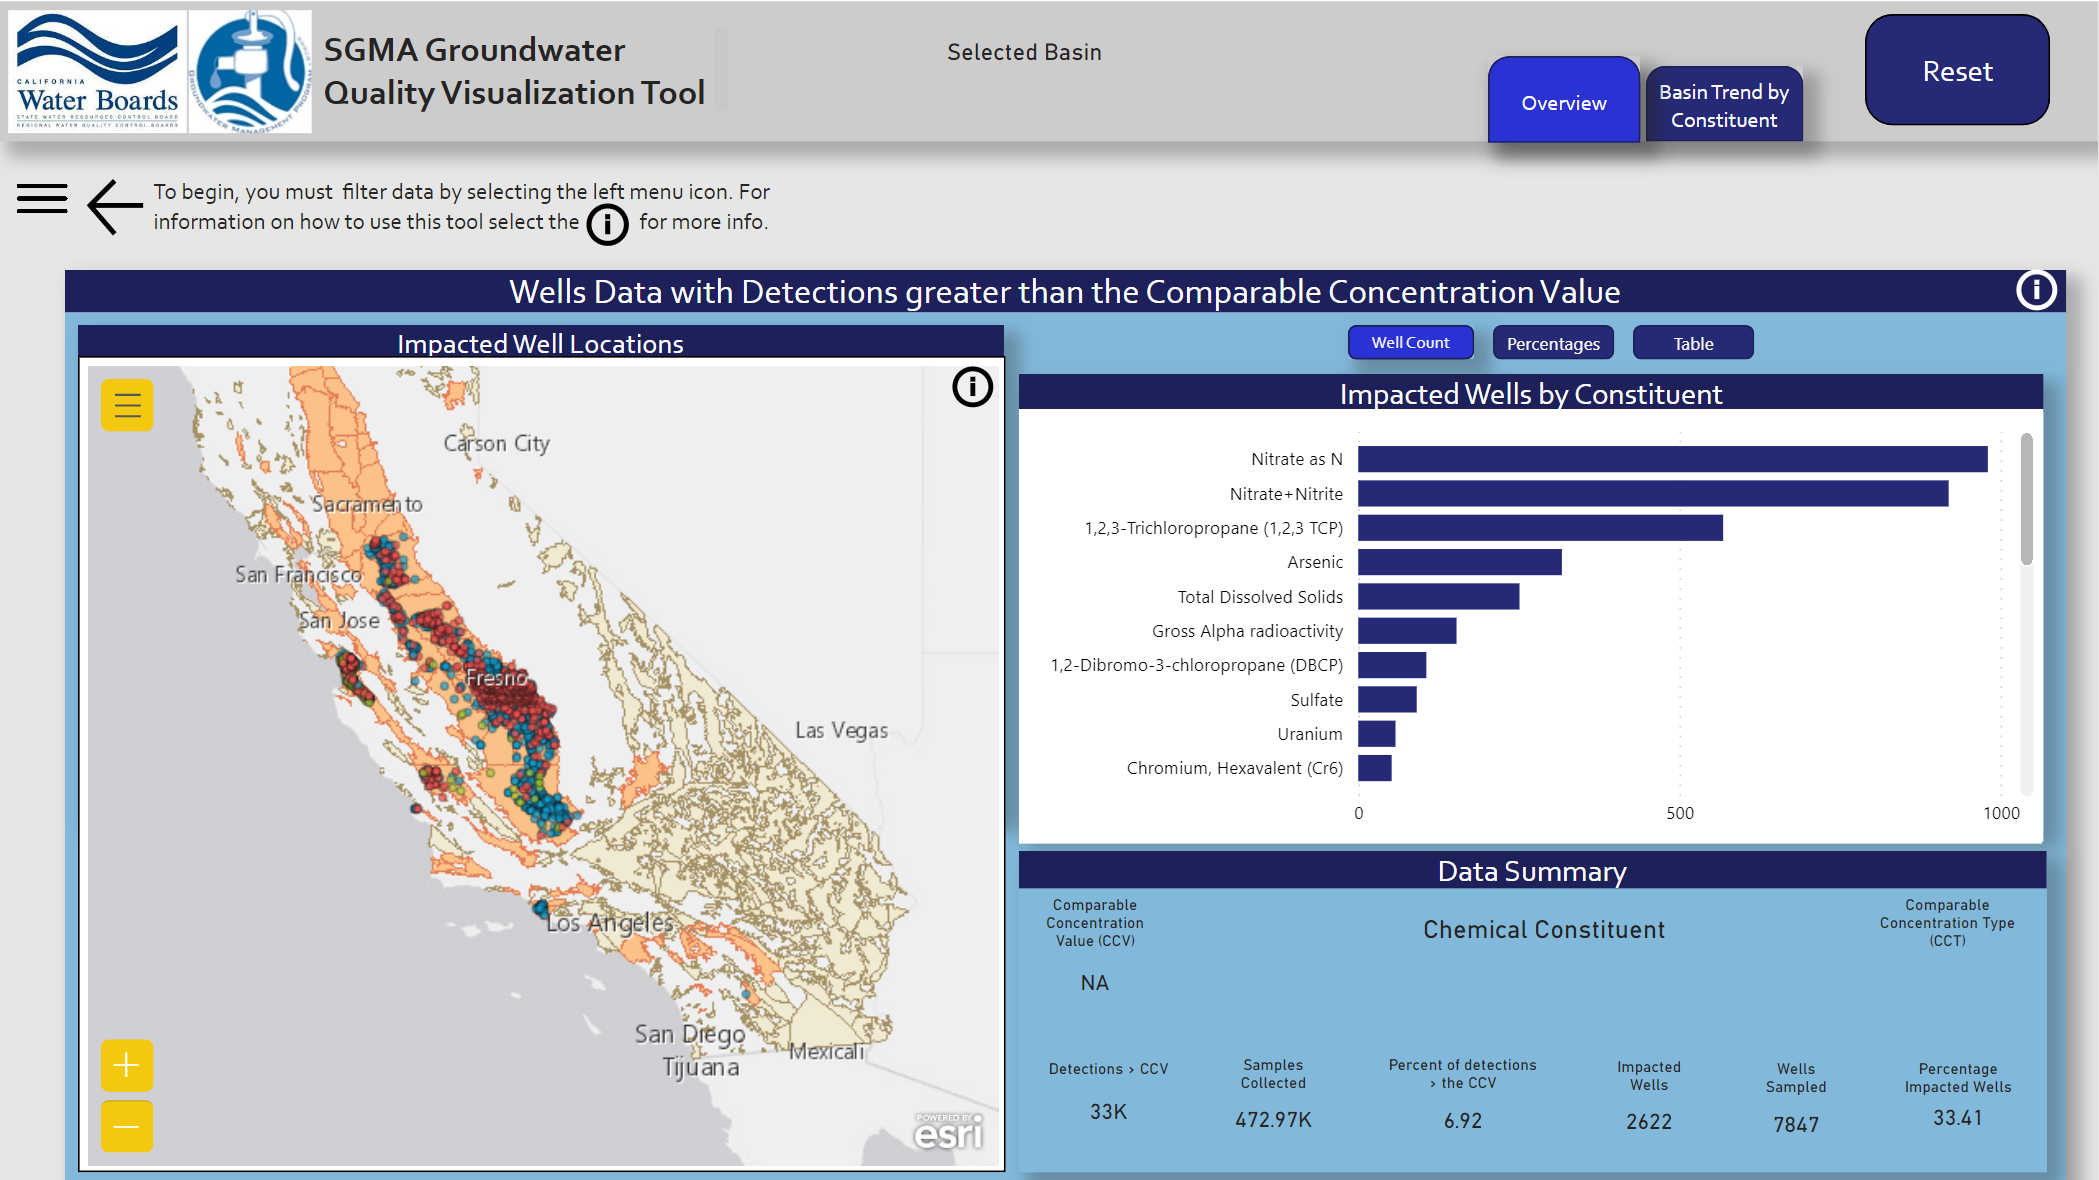 SGMA's Groundwater Quality Visualization Tool